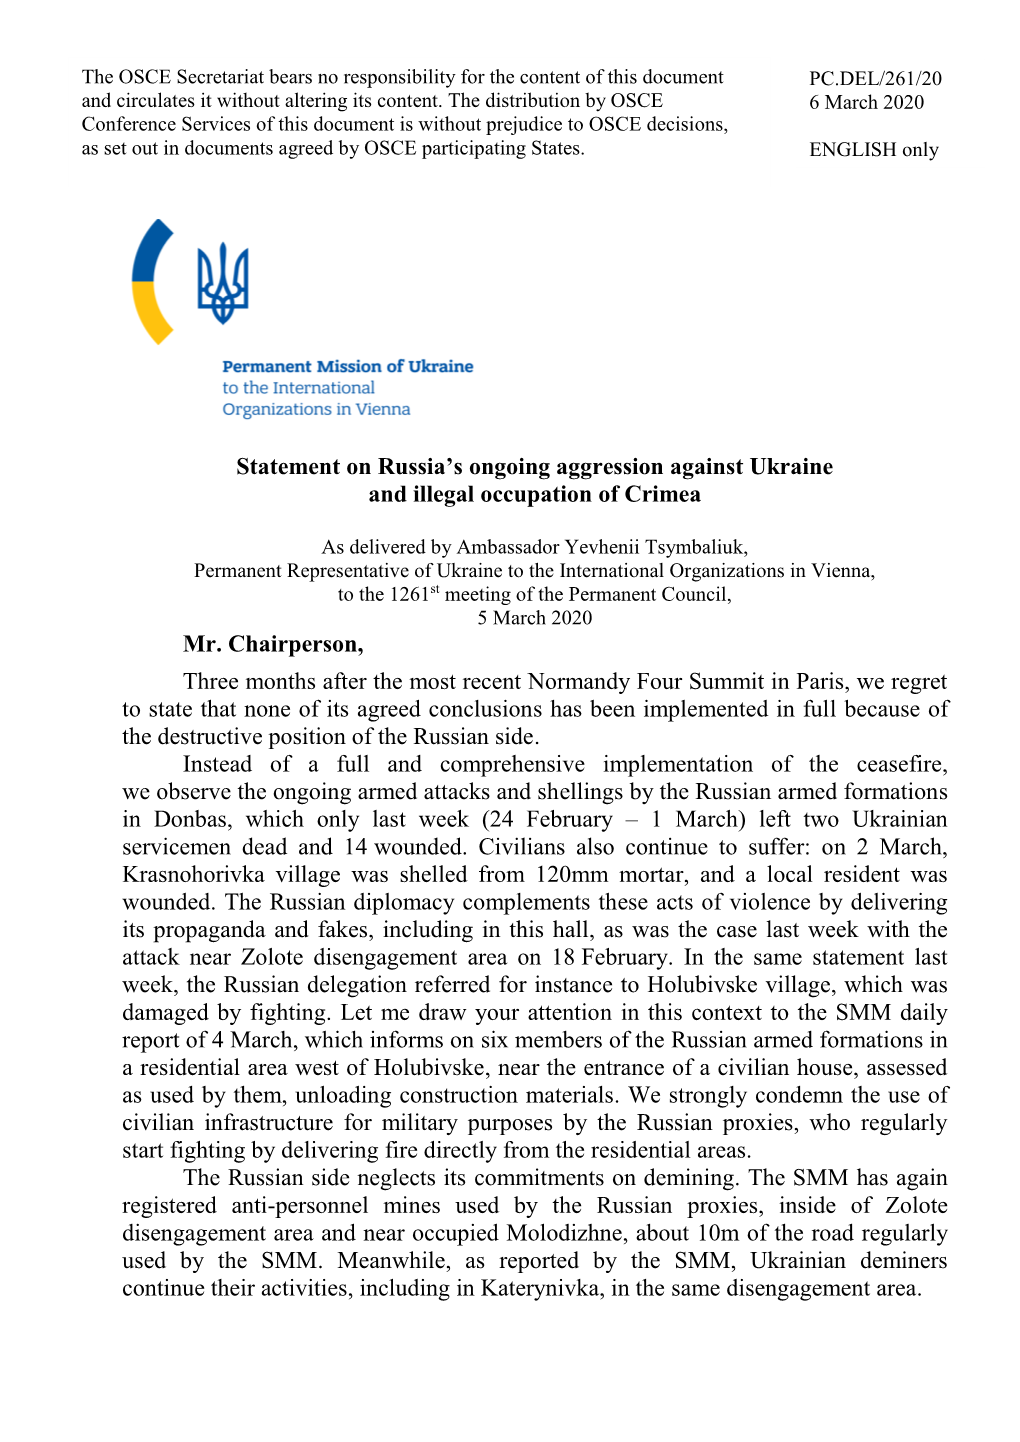 Statement on Russia's Ongoing Aggression Against Ukraine and Illegal Occupation of Crimea Mr. Chairperson, Three Months After